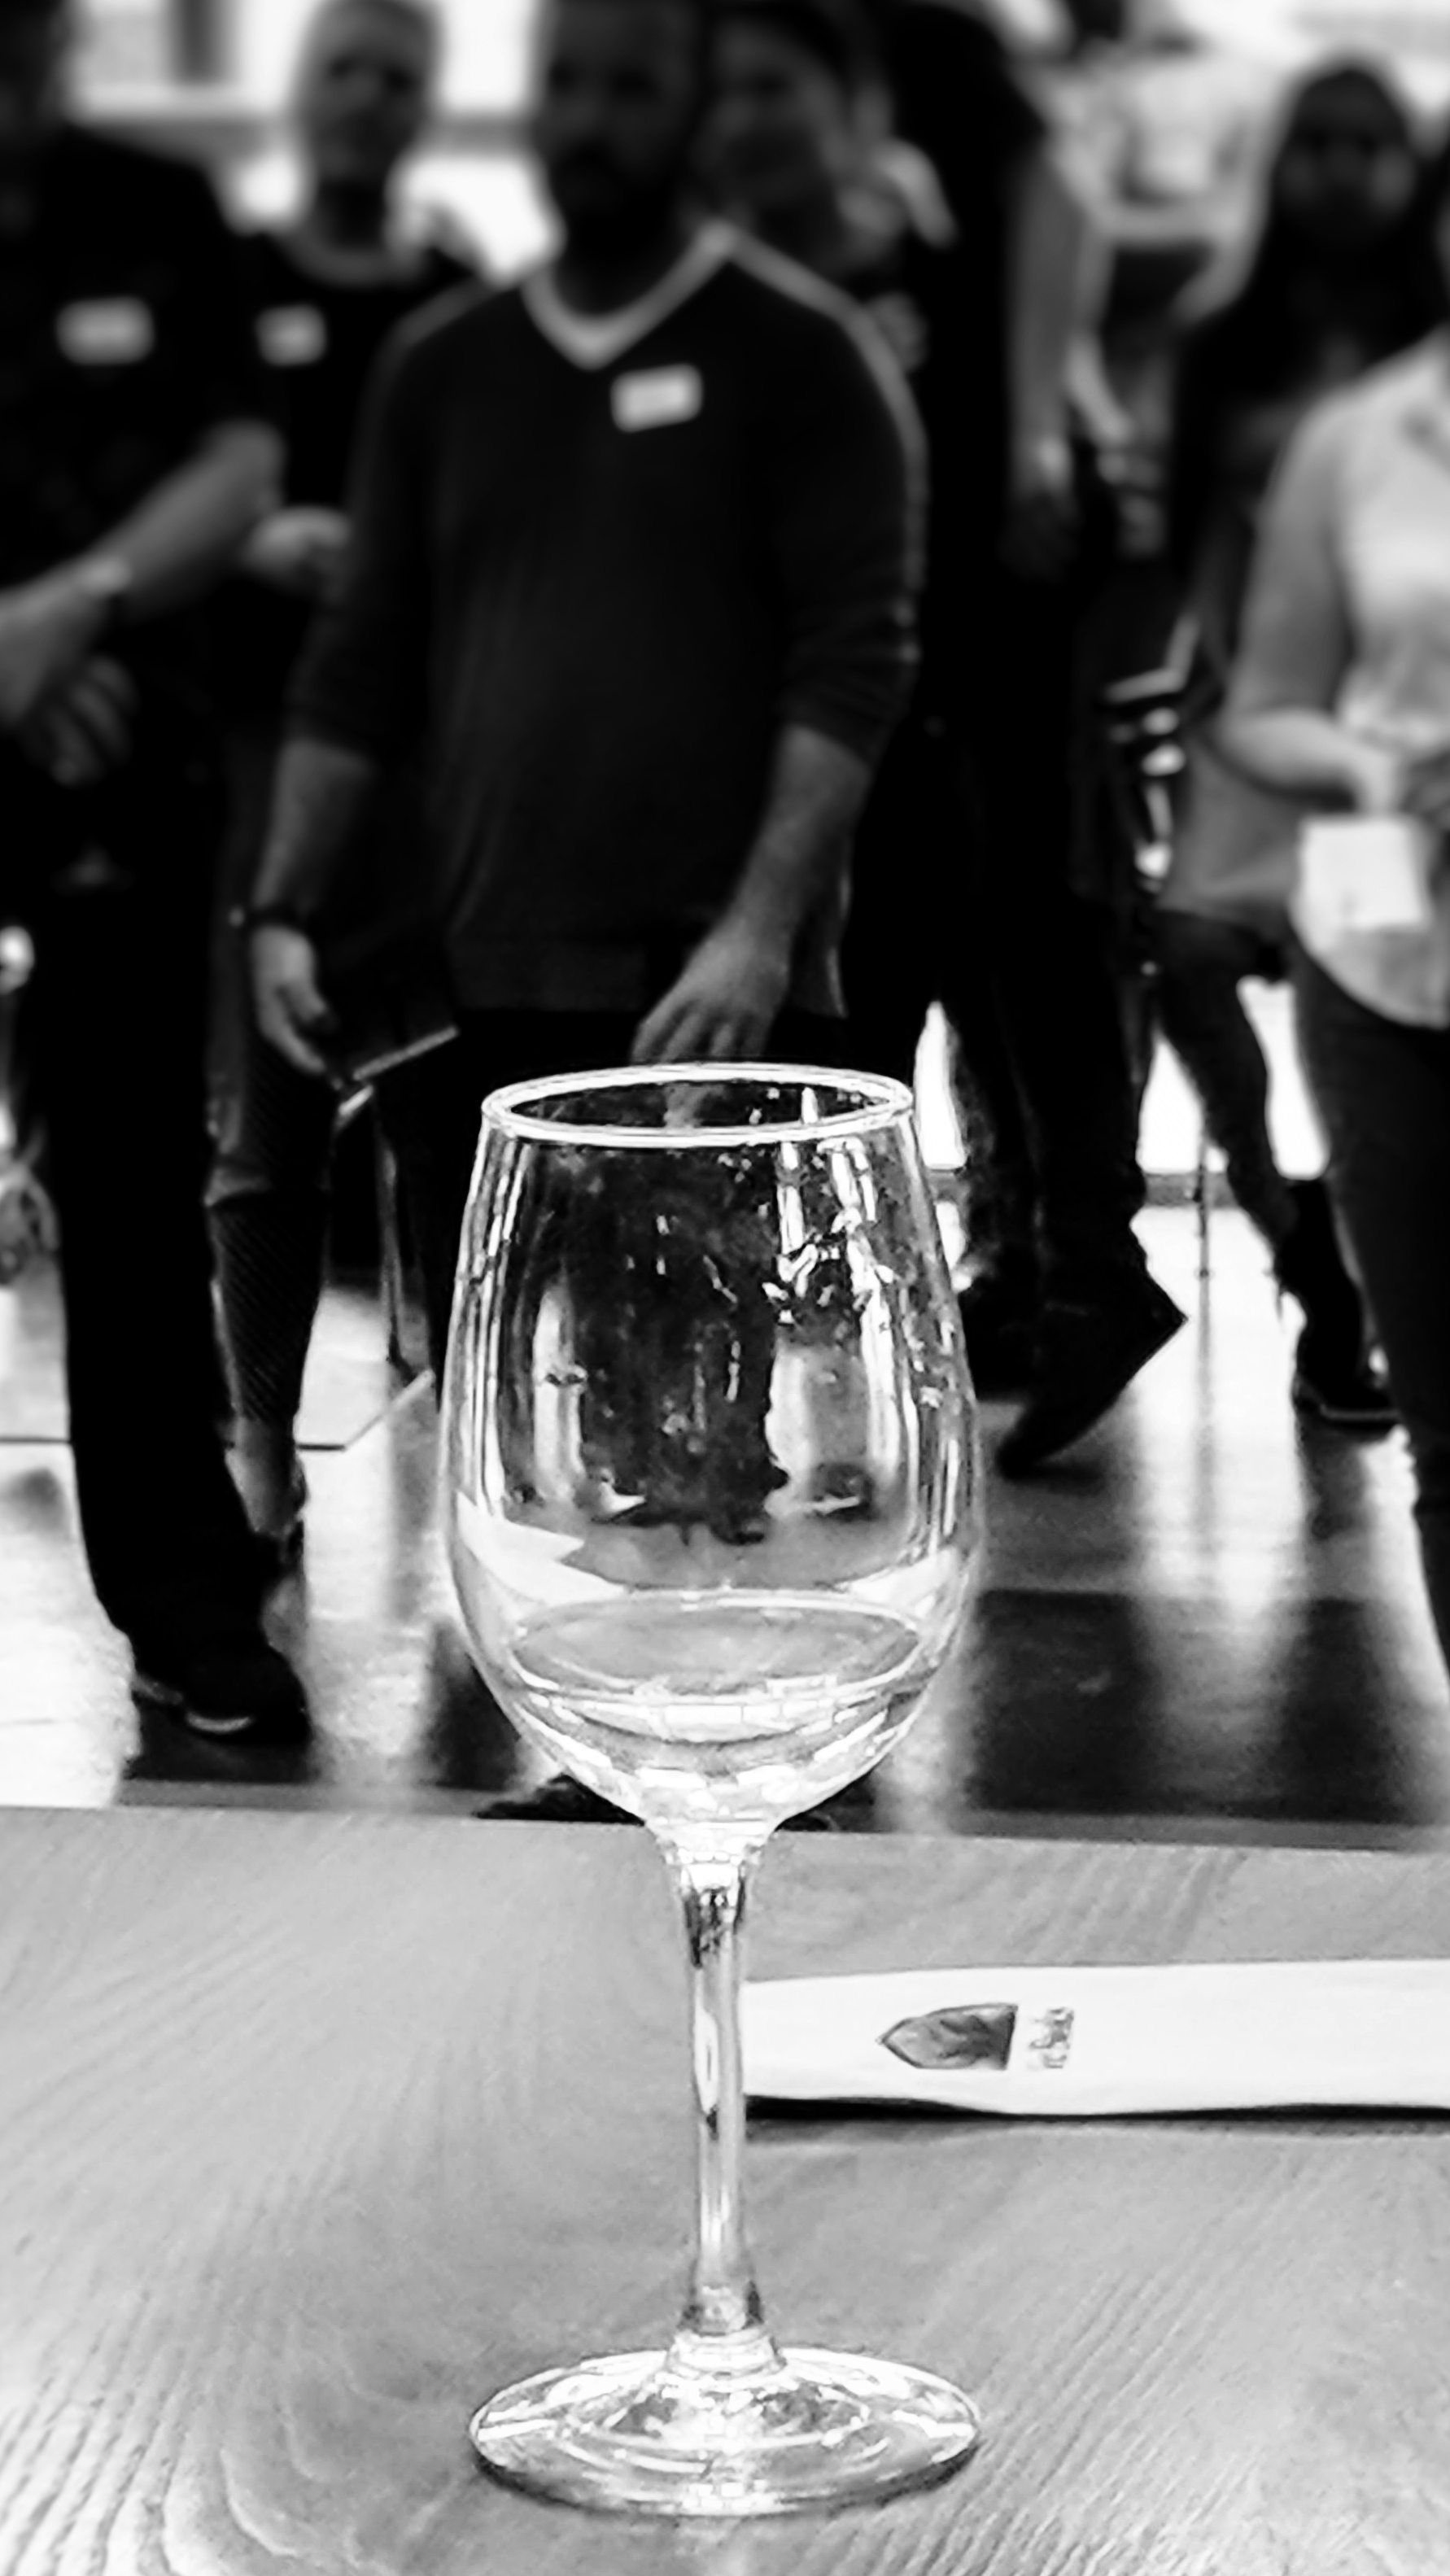 Black and white photo of a wine glass in front of people